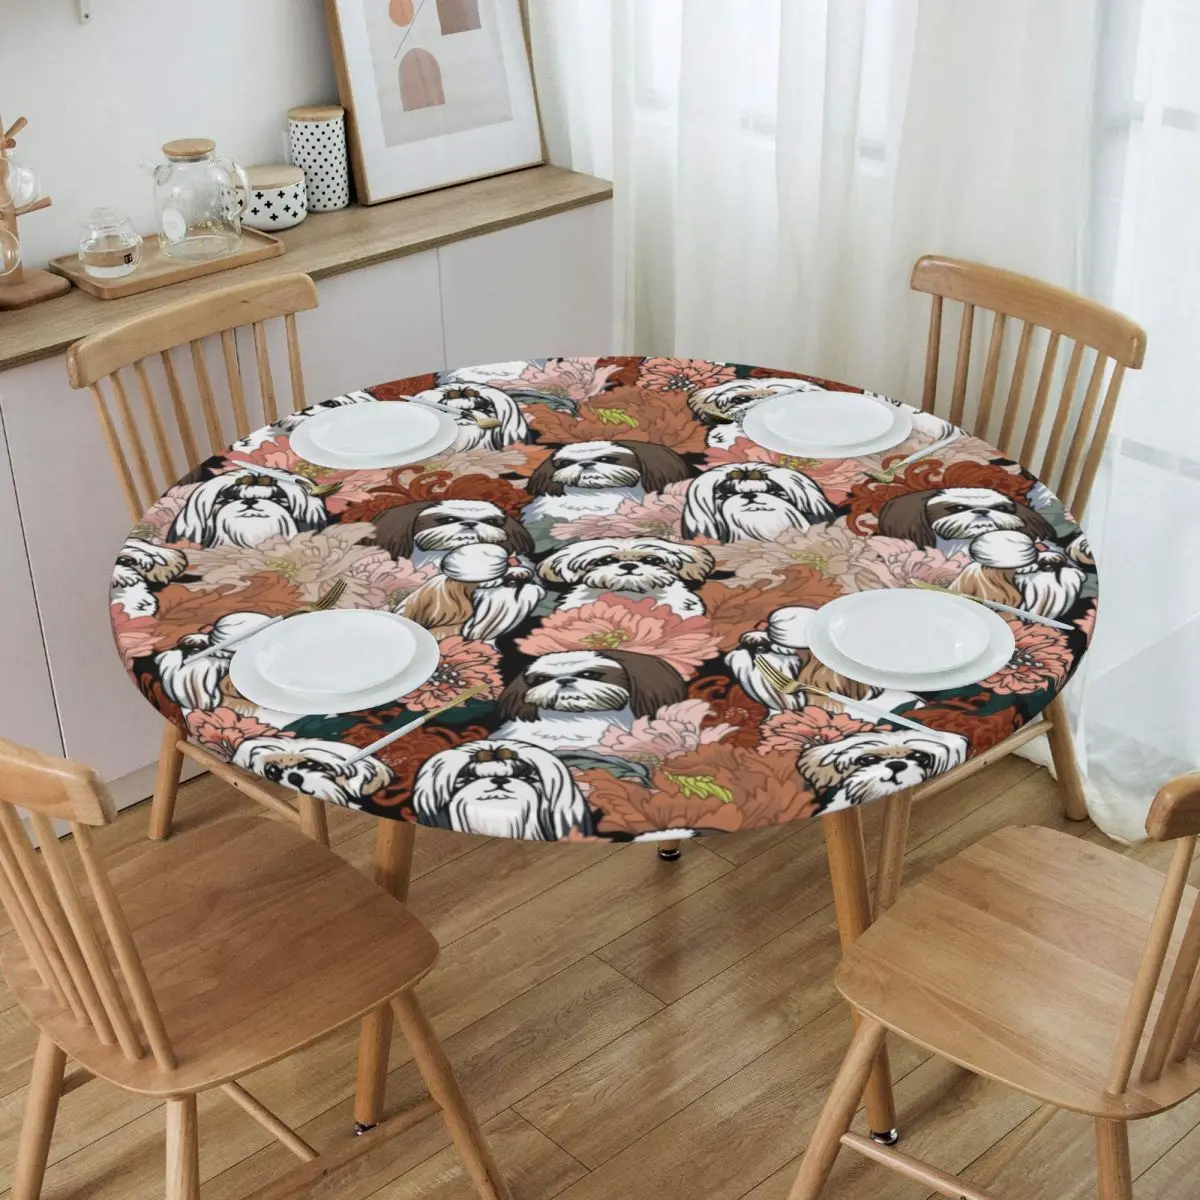 

Waterproof Oil-Proof Shih Tzu Dog Flowers Pattern Tablecloth Backed Elastic Edge Table Cover 45"-50" Fit Pet Animal Table Cloth